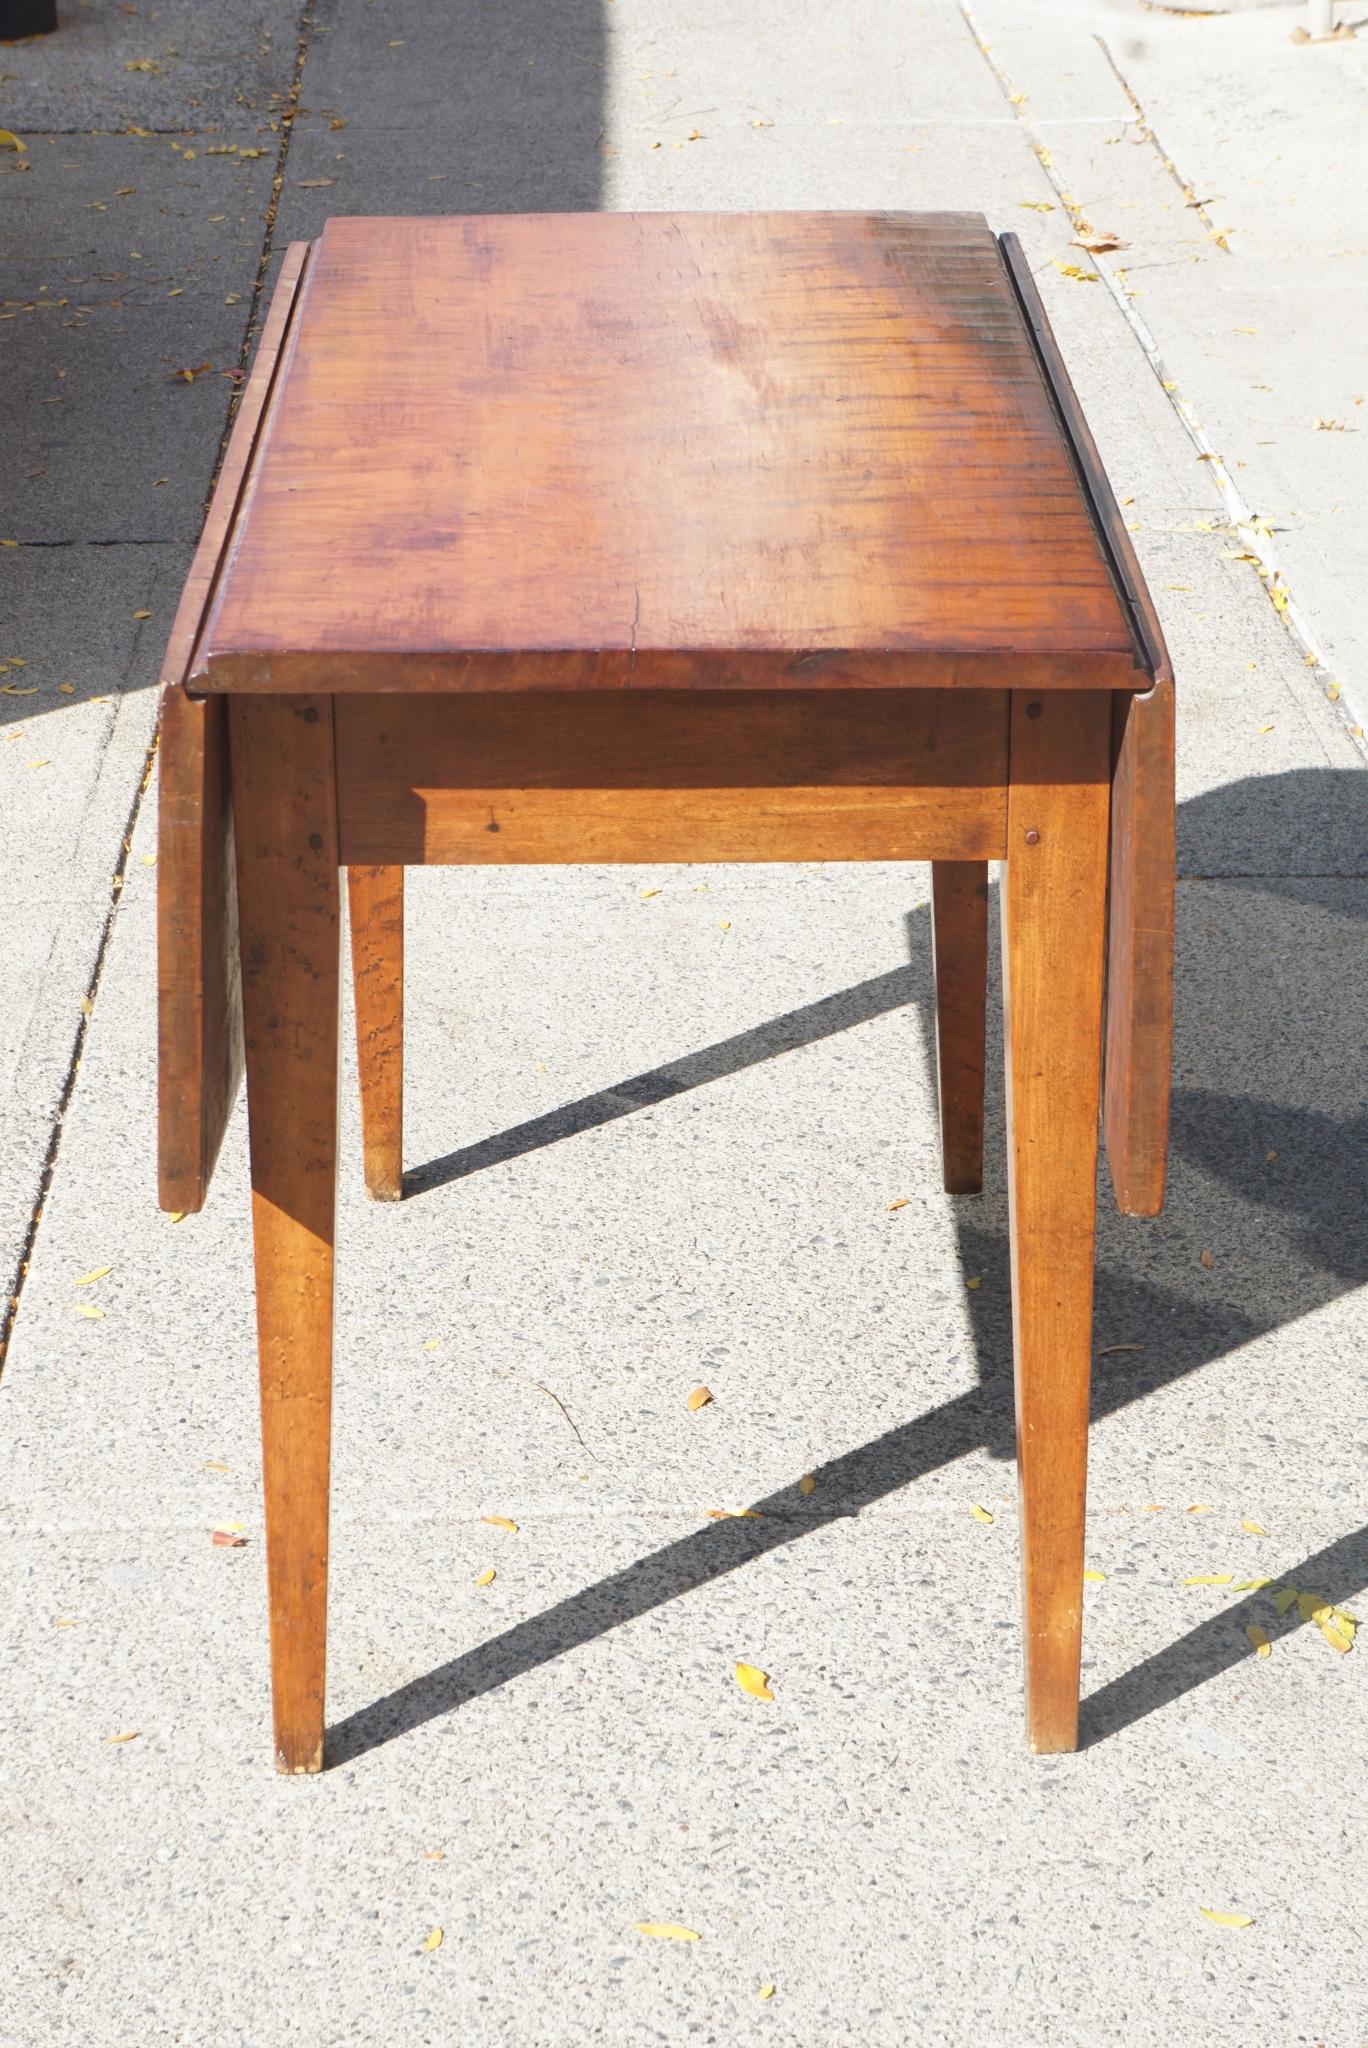 Federal Early 19th Century American Tiger Maple Small Drop Leaf Table (amerikanisch) im Angebot